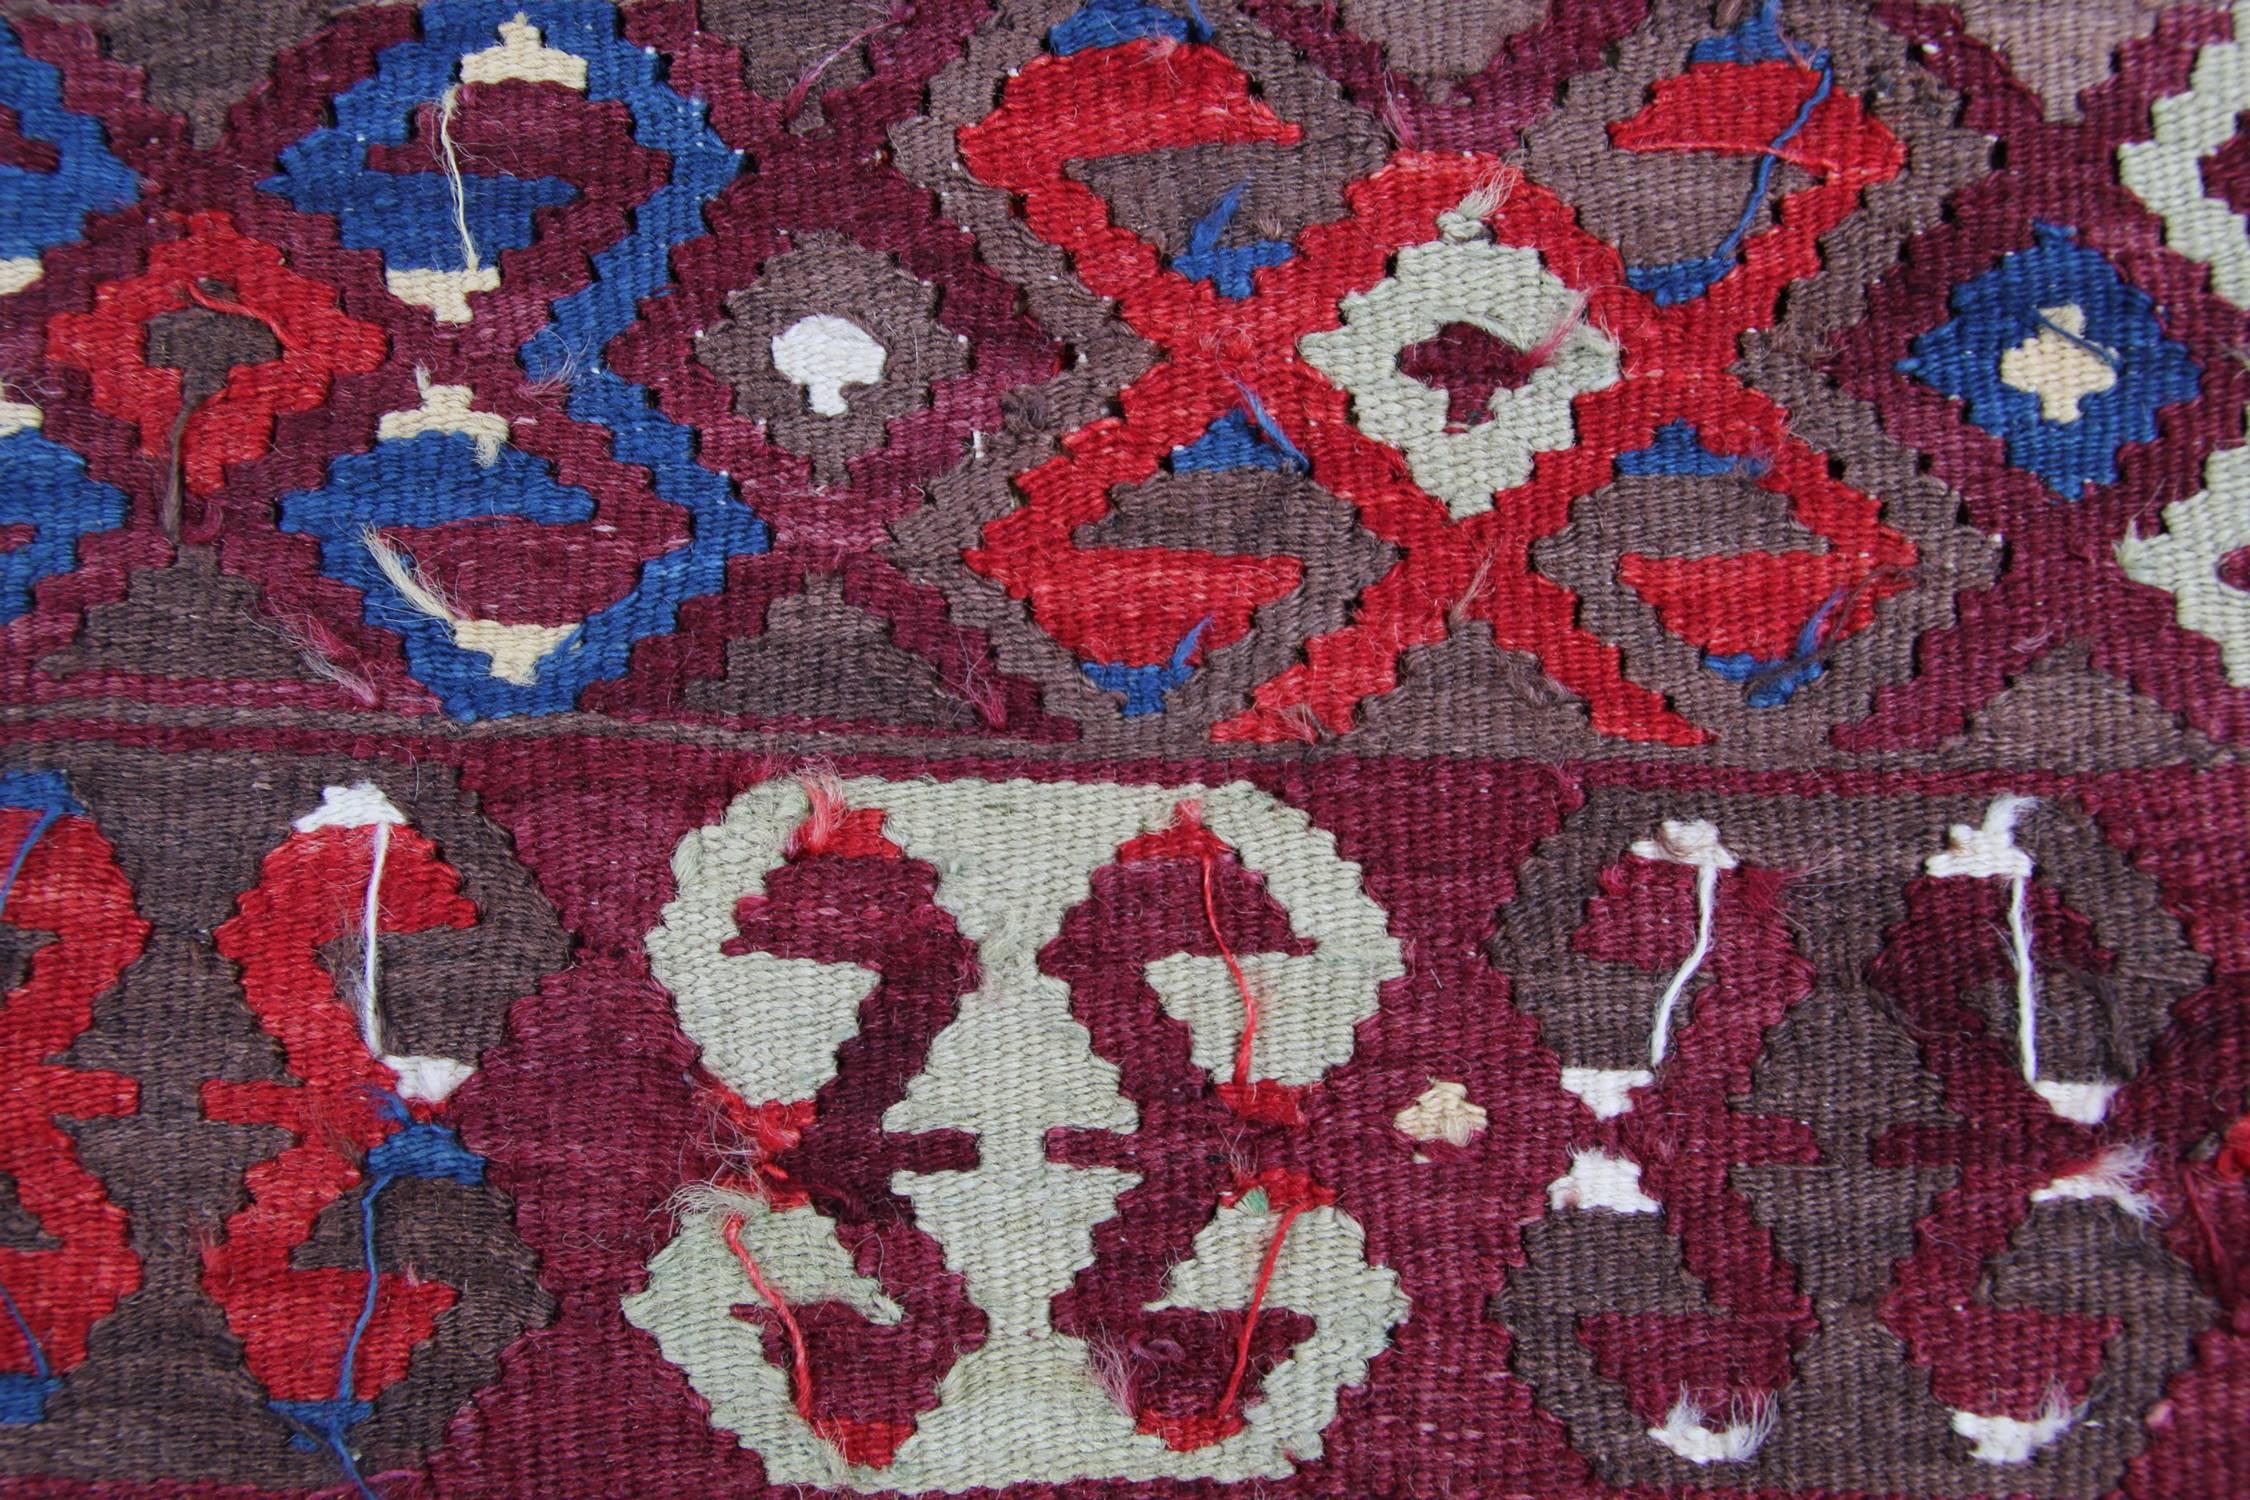 Antique Rugs, Anatolian Turkish Kilim Rugs, Turkish Carpet from Anatolia In Excellent Condition For Sale In Hampshire, GB